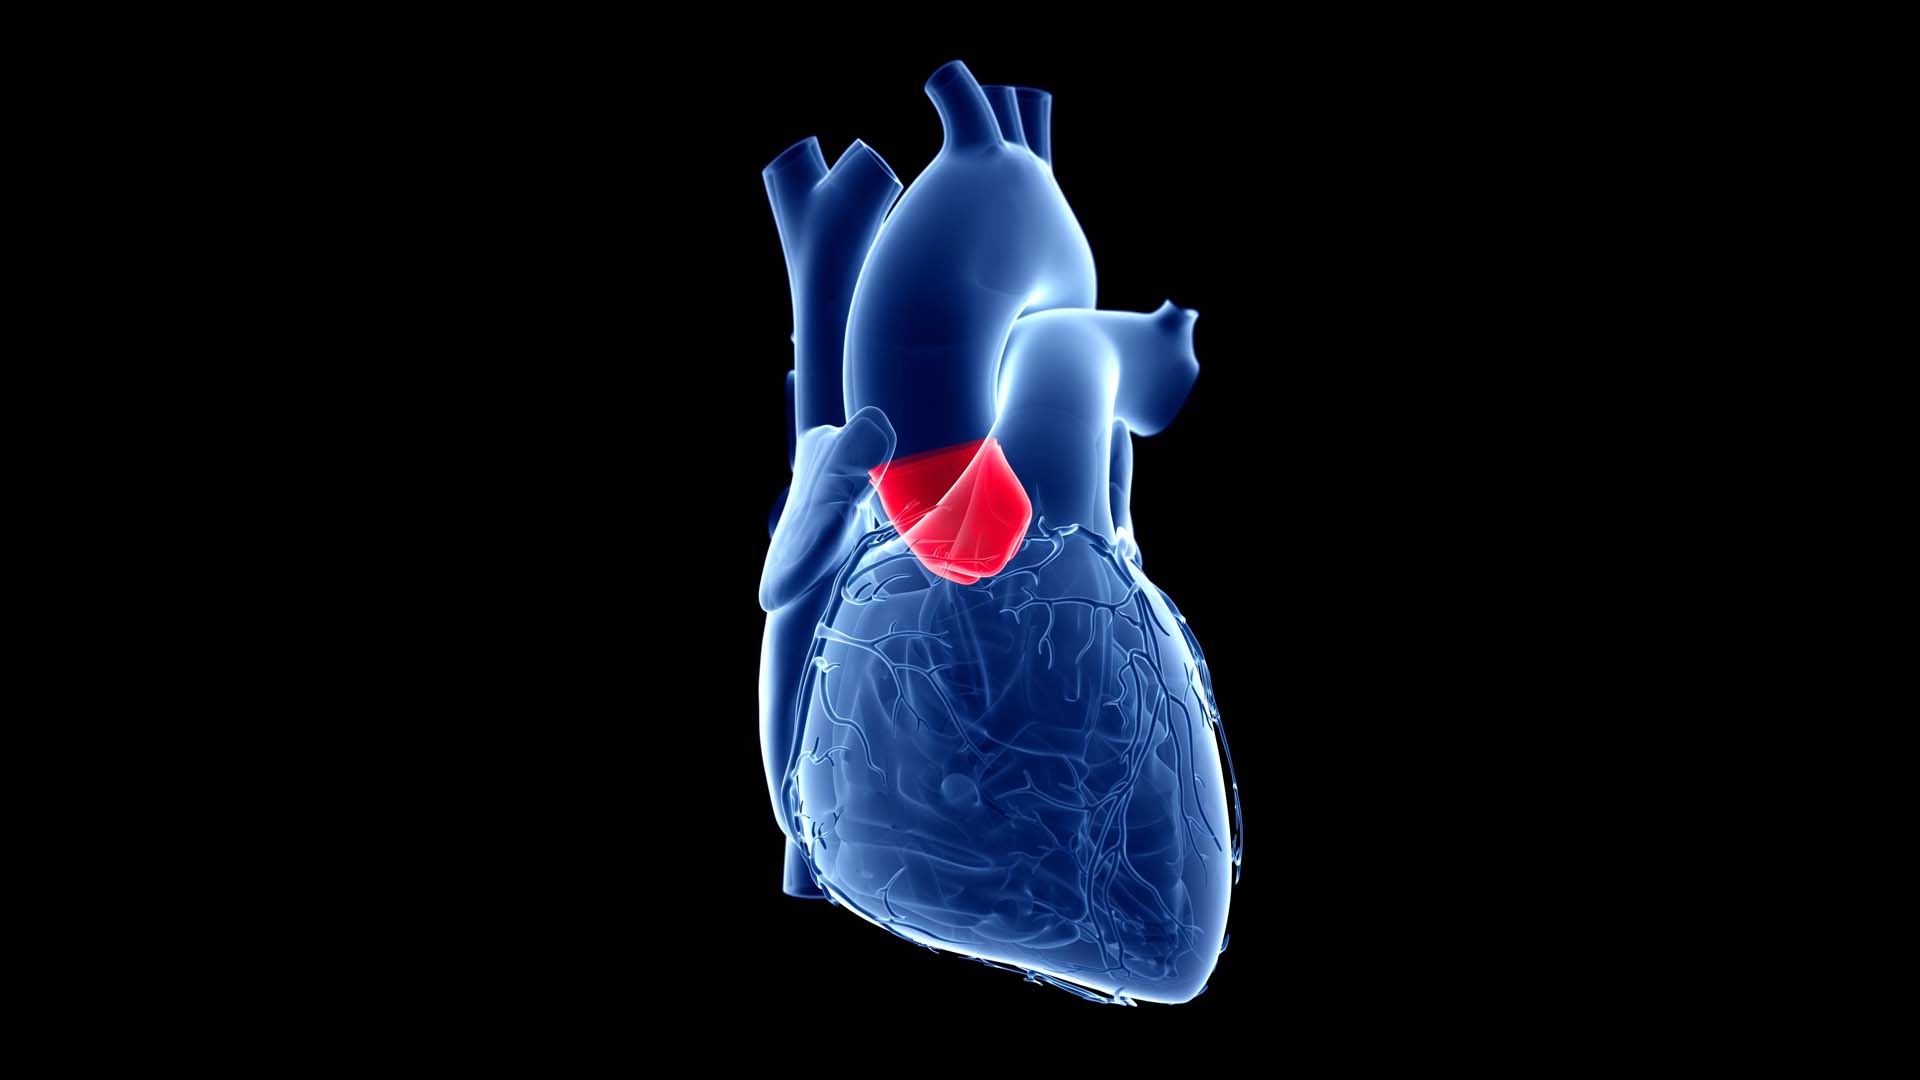 Identifying Therapeutic Targets for Heart Valve Defects